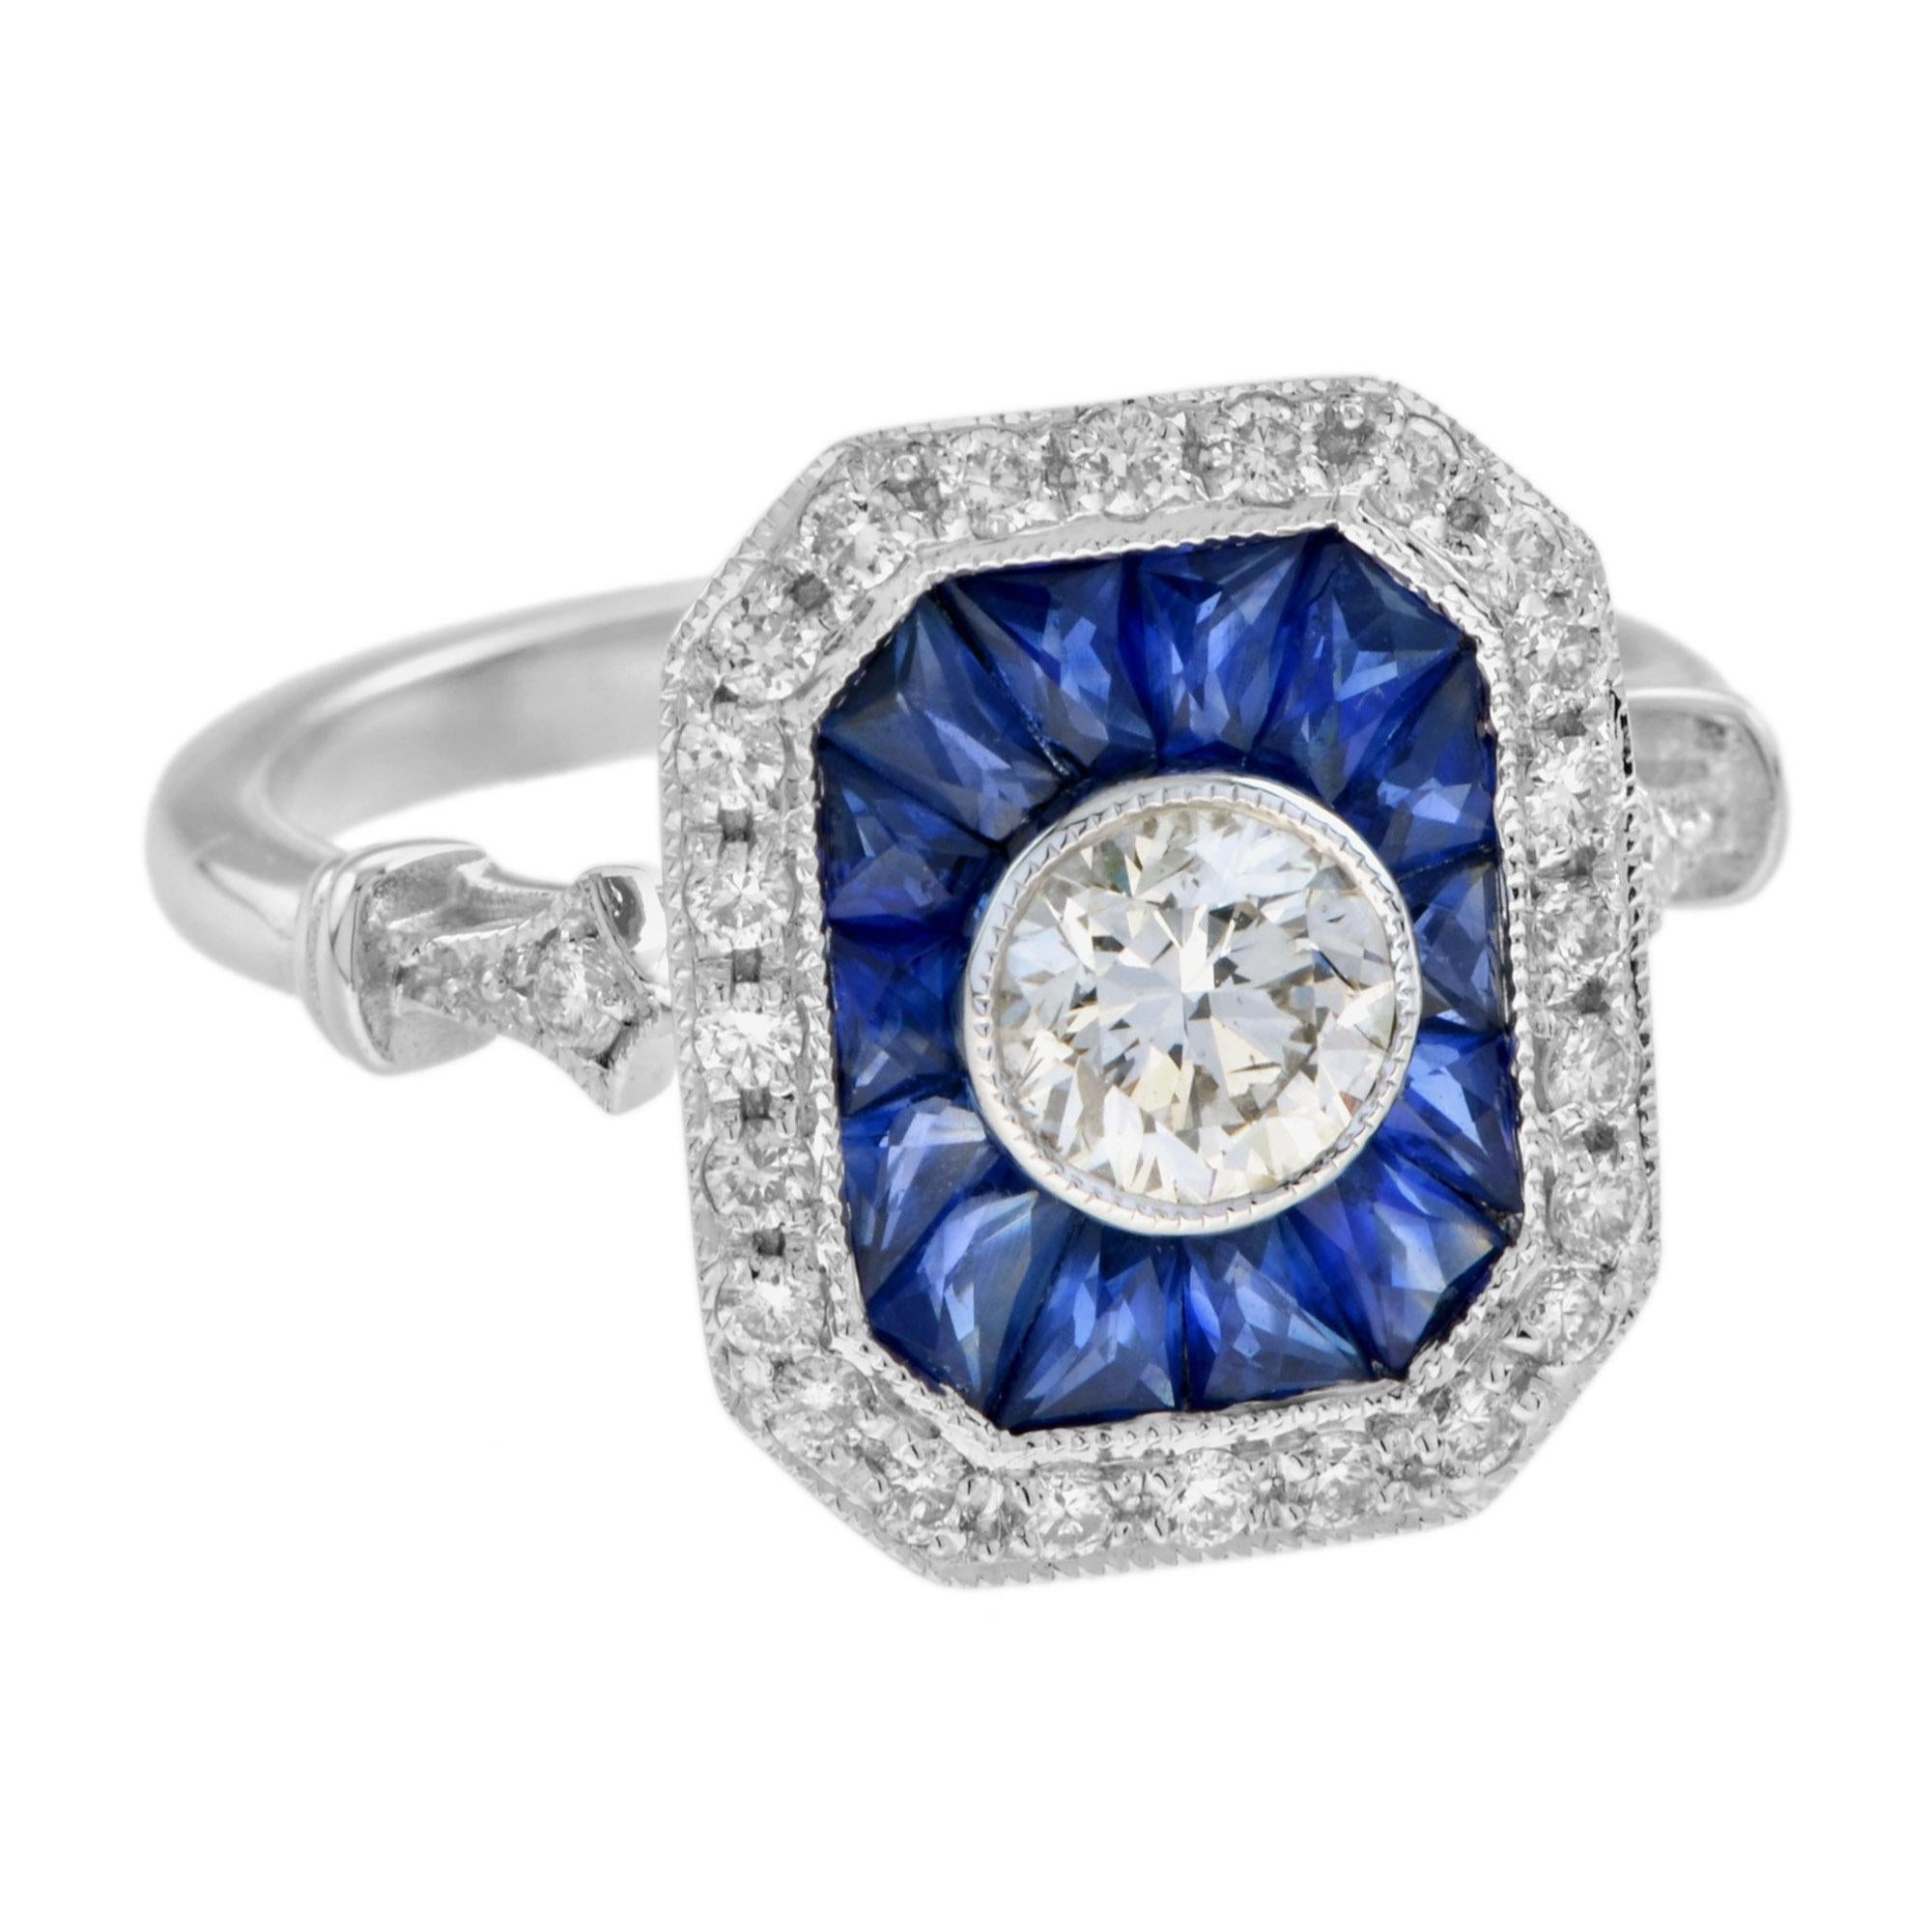 For Sale:  Diamond and Sapphire Art Deco Style Engagement Ring in 18k White Gold 4